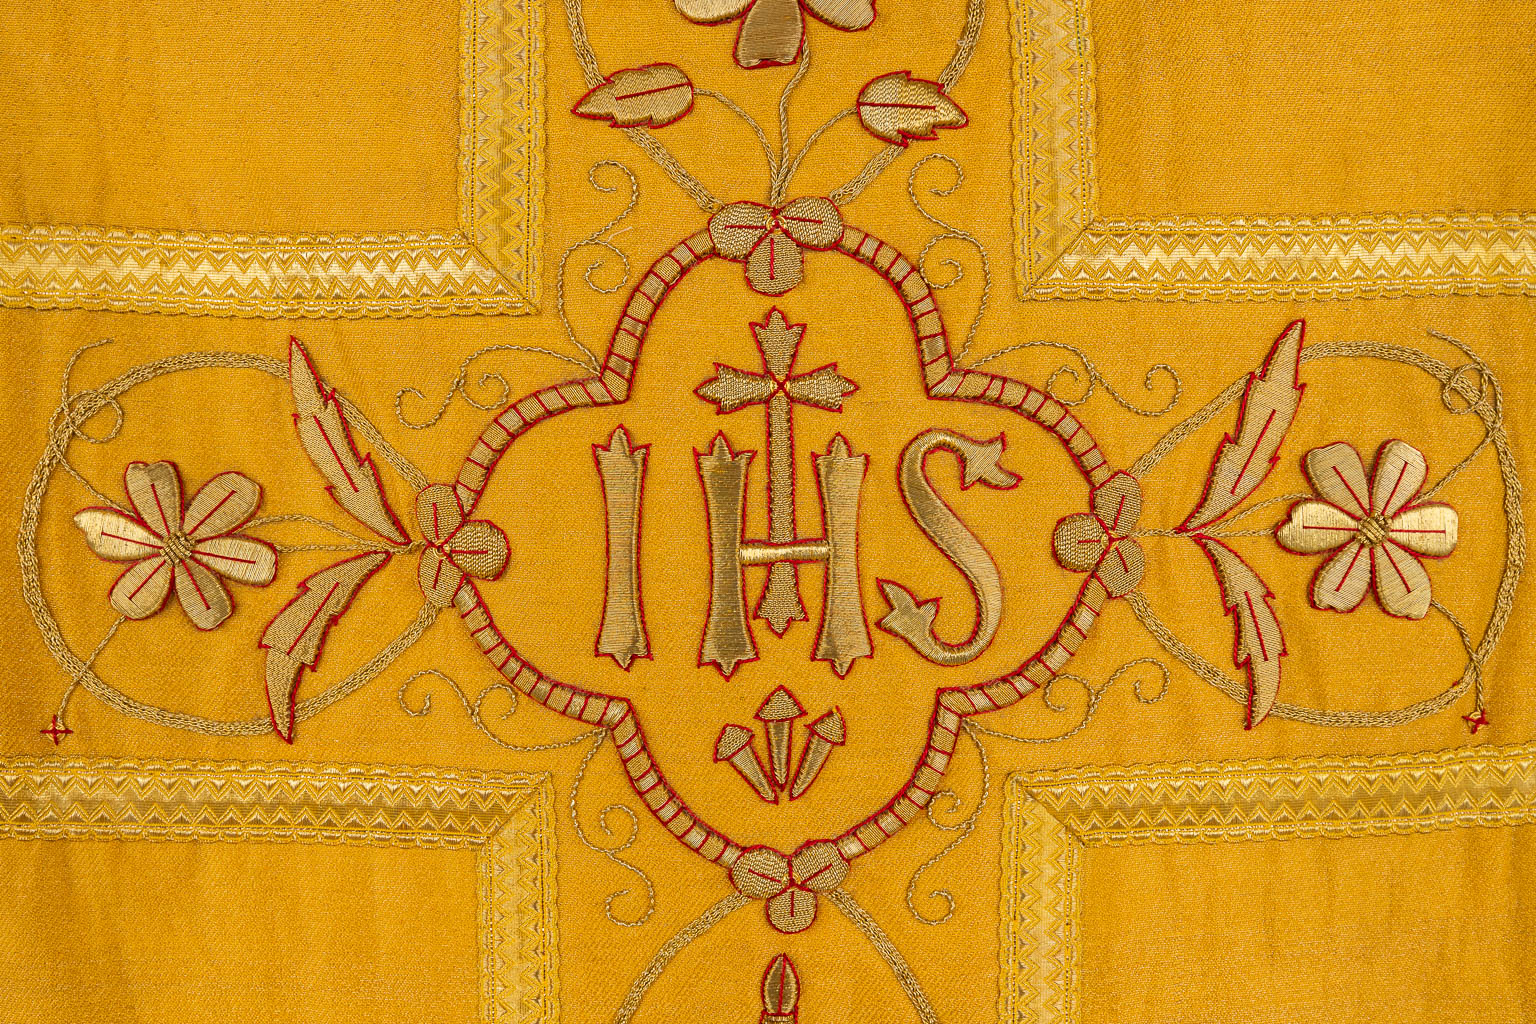 A cope, two humeral veils, a Roman Chasuble, finished with thick gold thread embroideries.